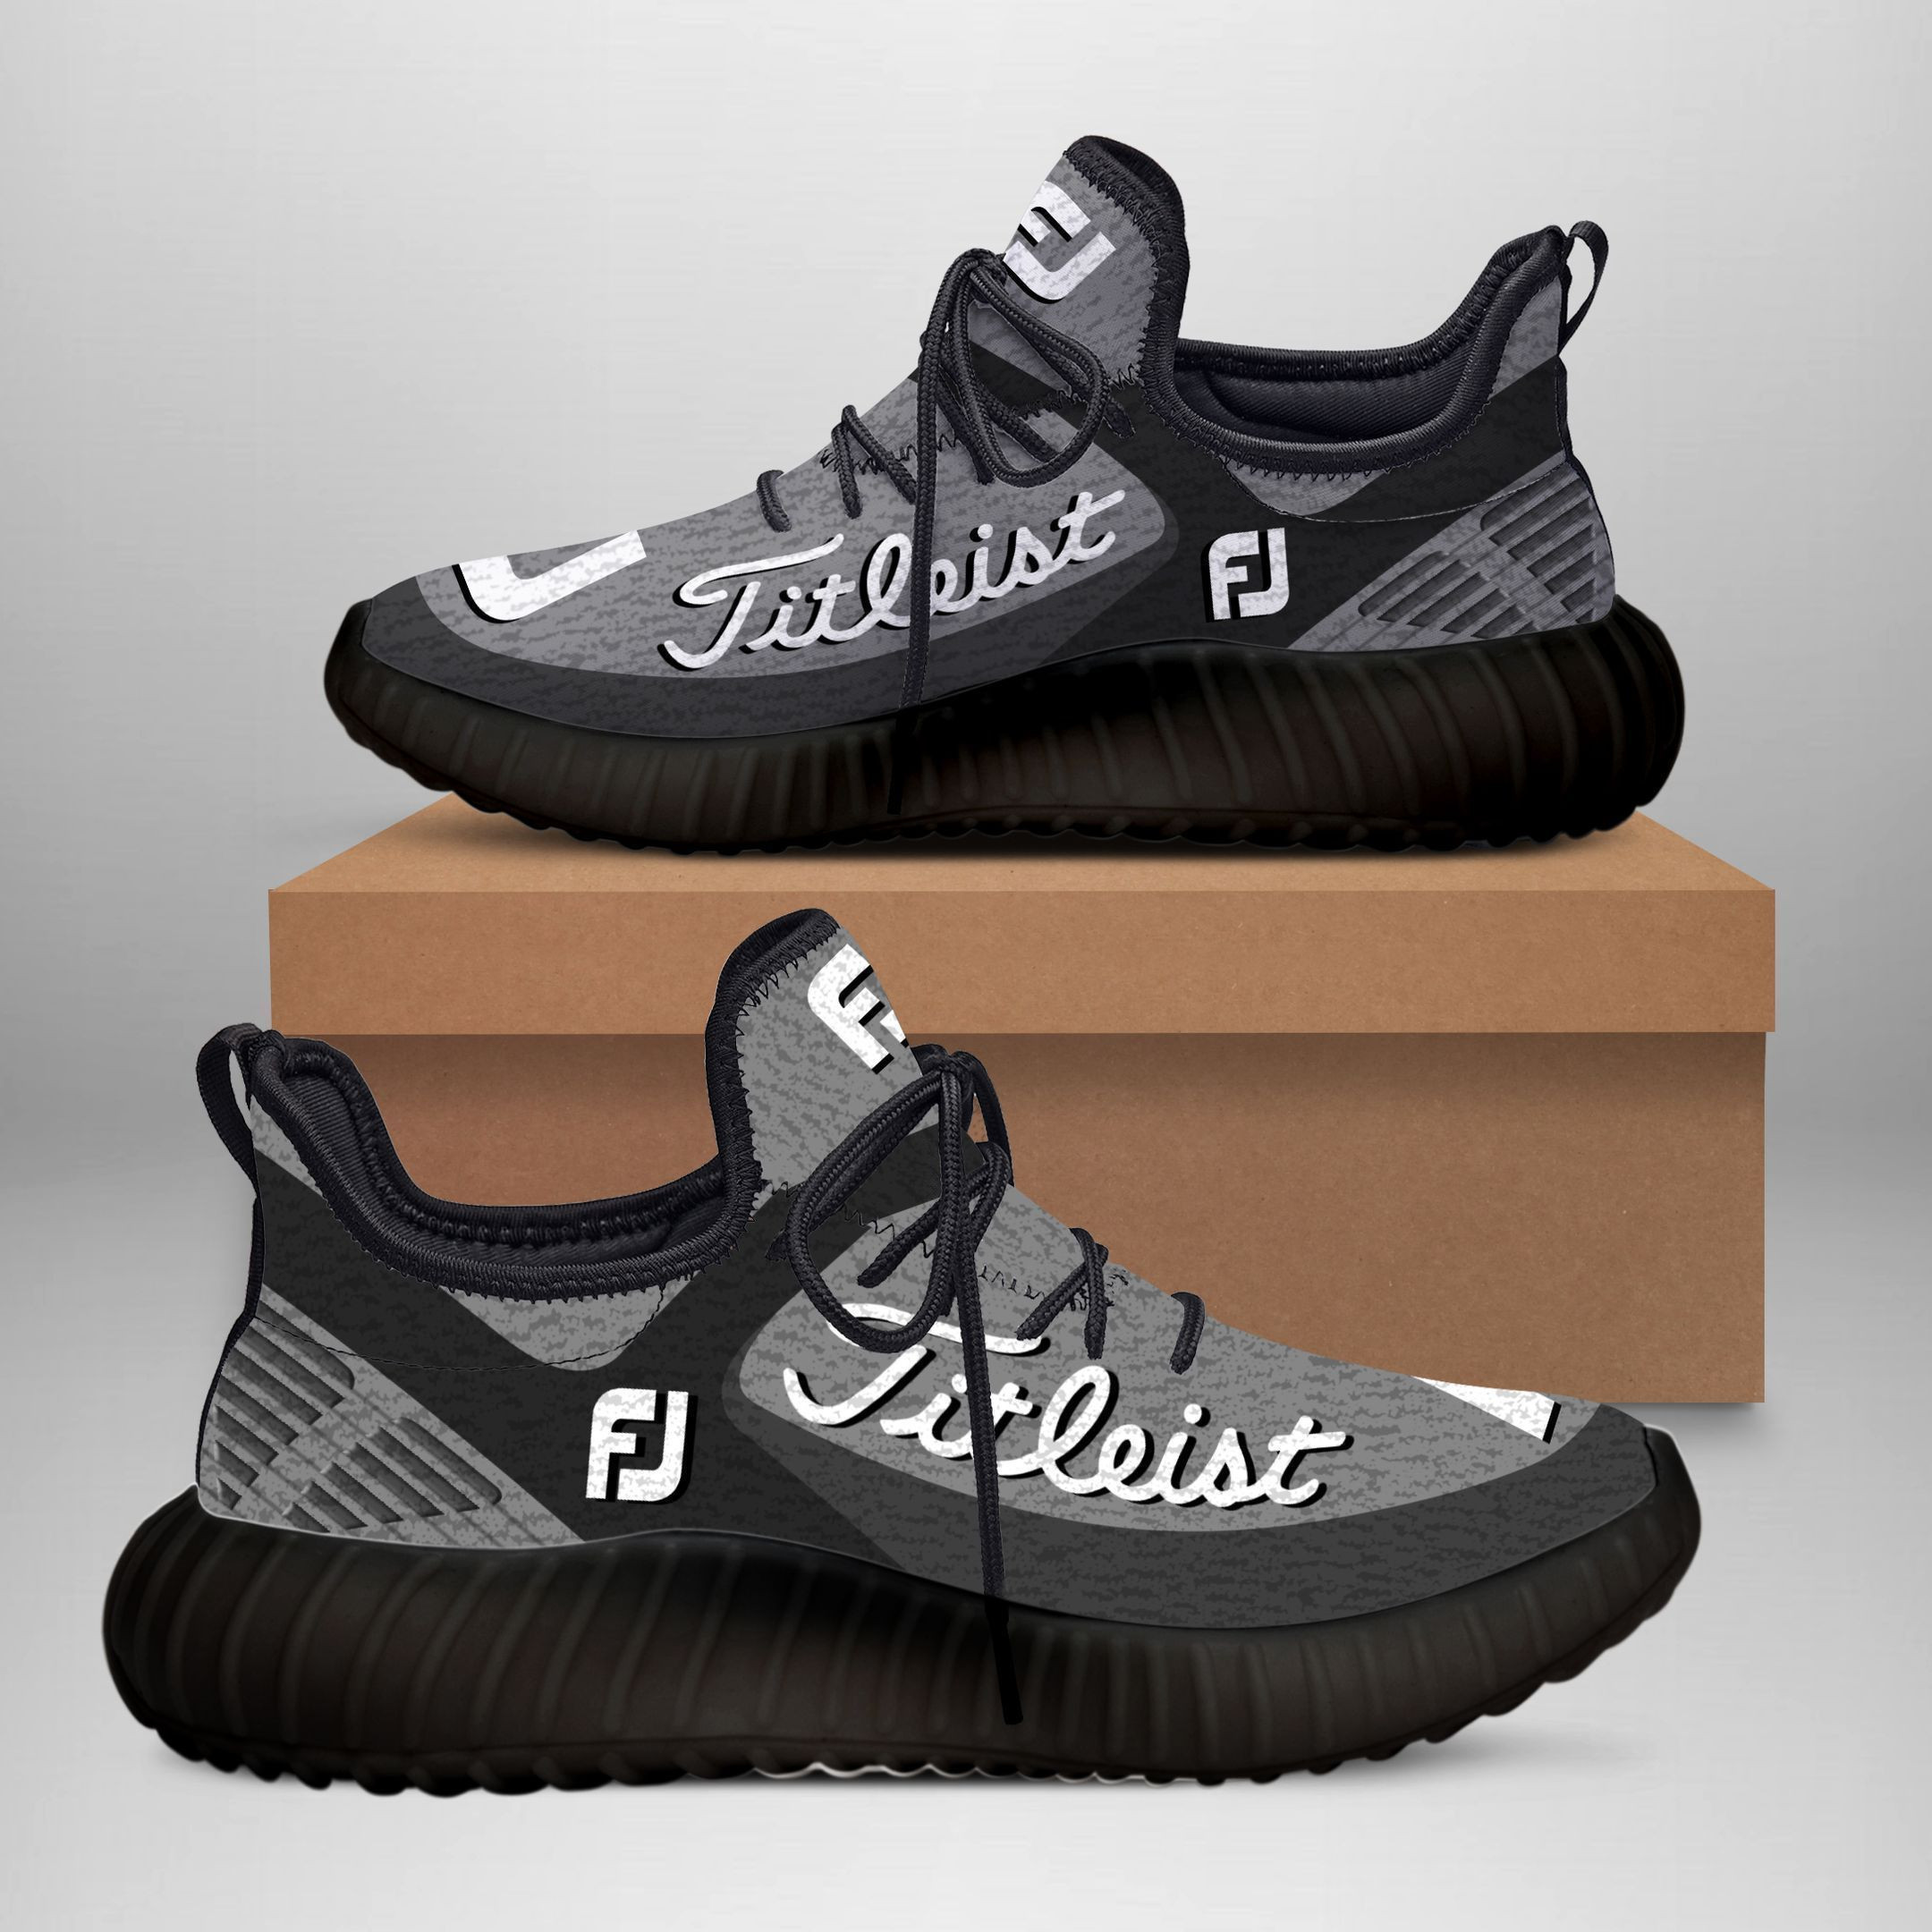 Titleist FootJoy Yeezy Shoes - LIMTED EDITION